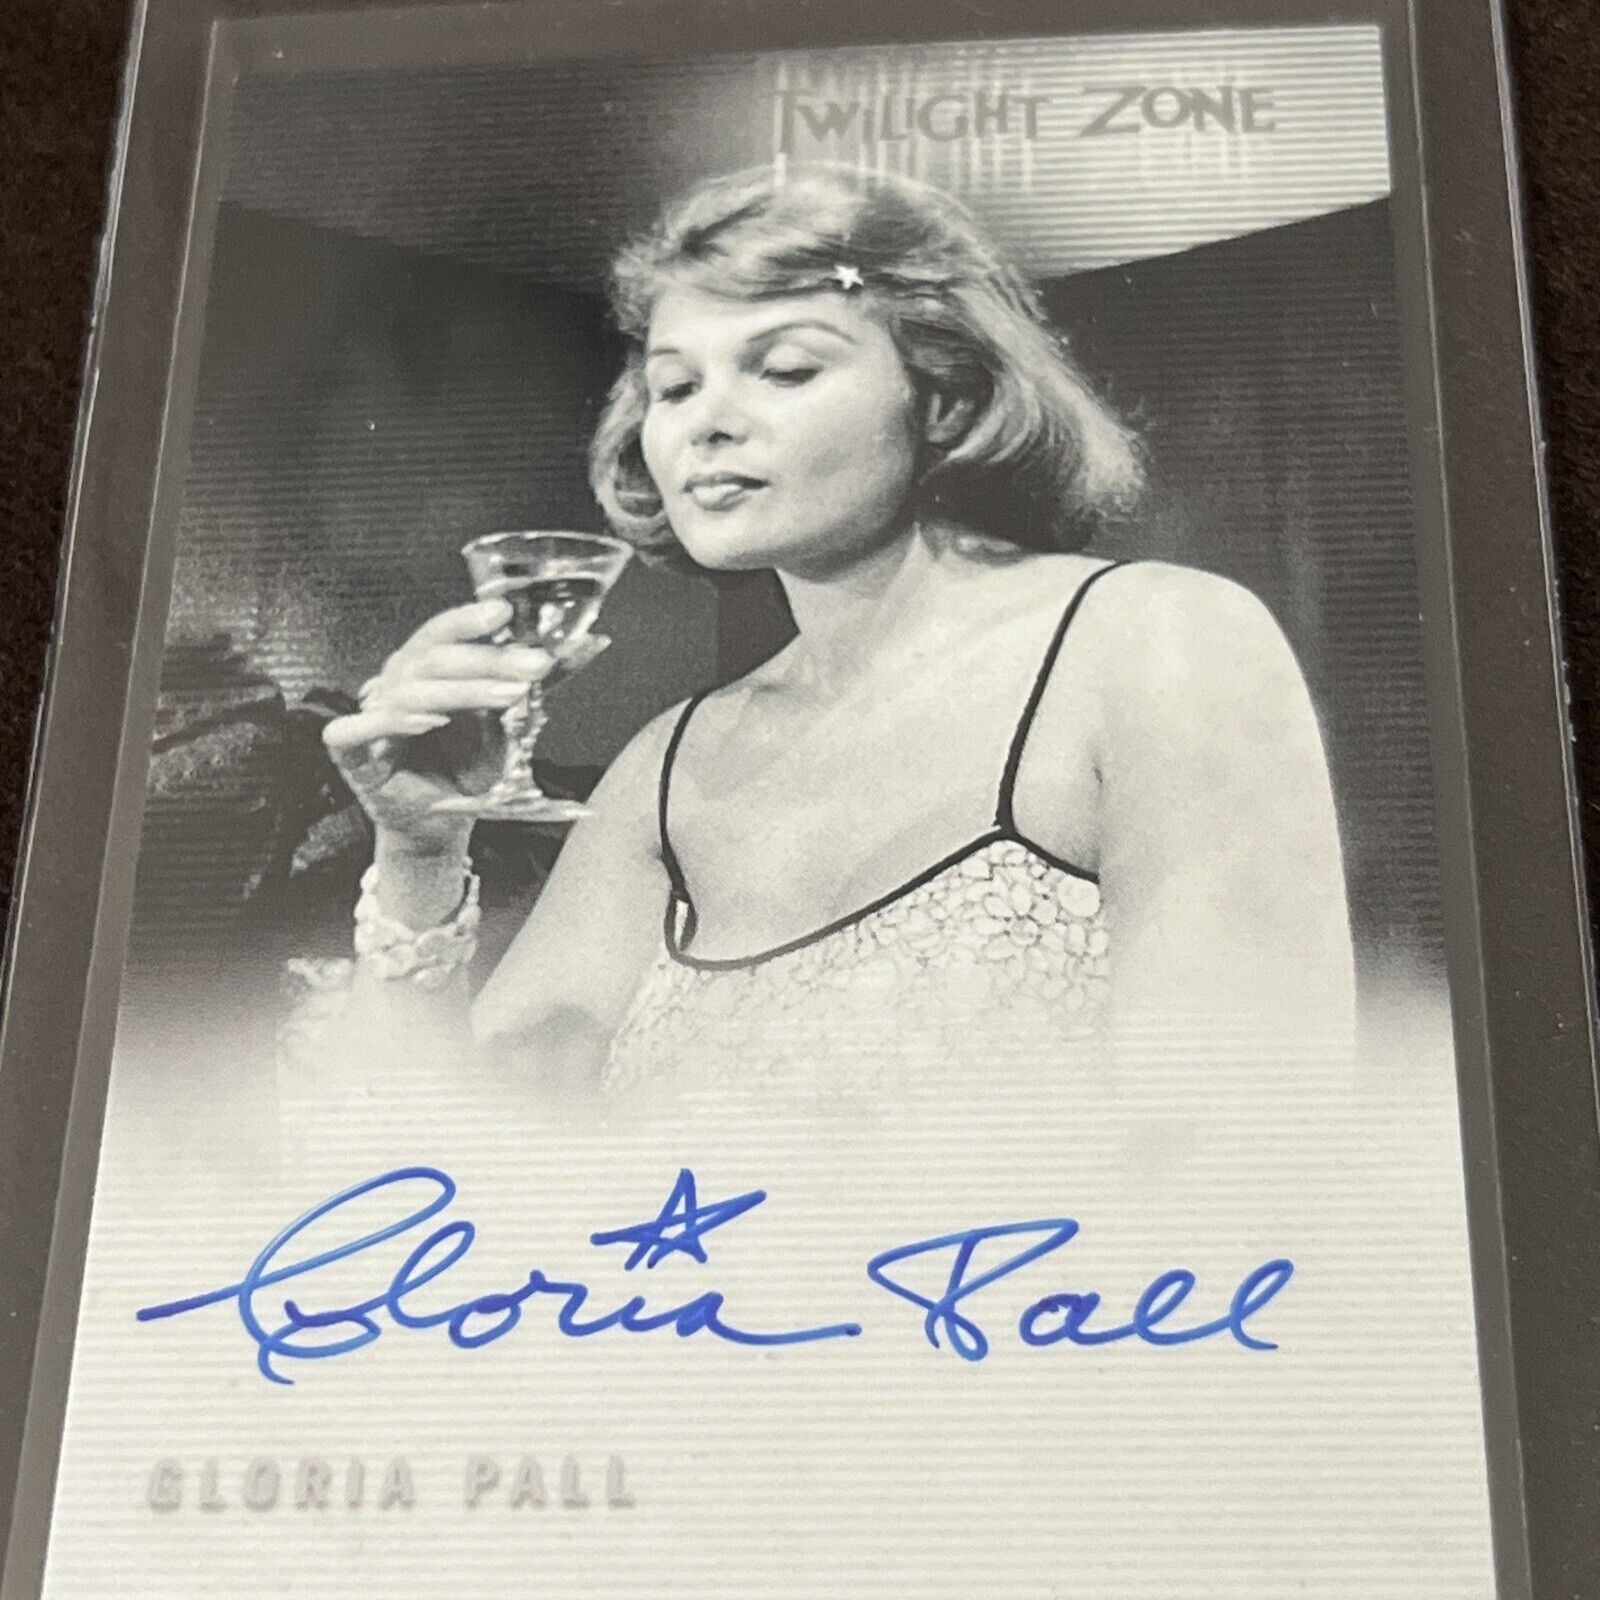 2002 Twilight Zone Gloria Pall Auto The Girl at Bar in “And When the Sky Opened”